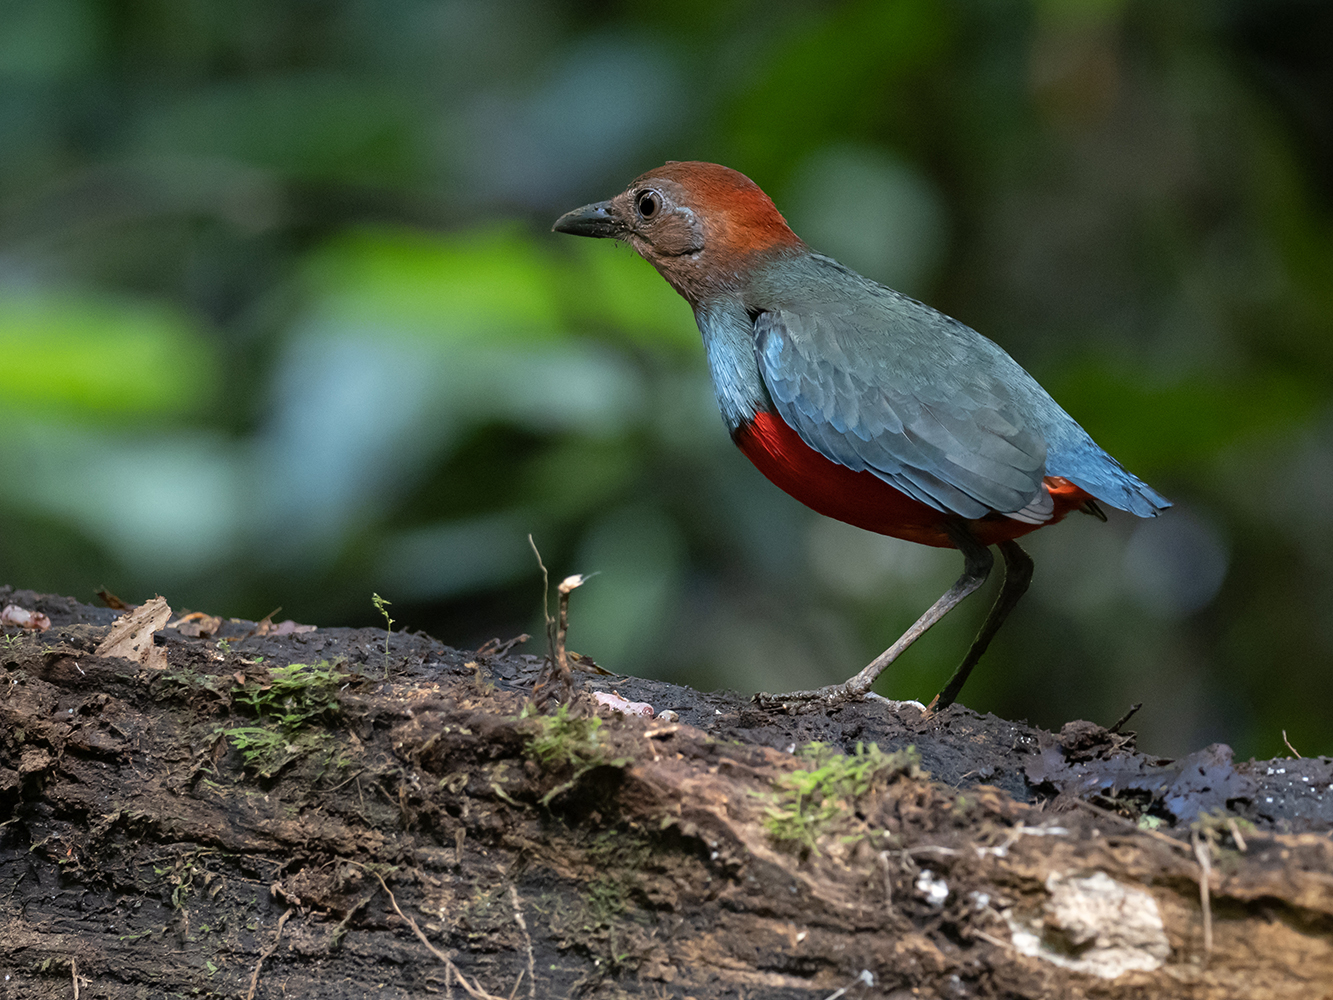 Red-bellied Pitta sitting on the ground.